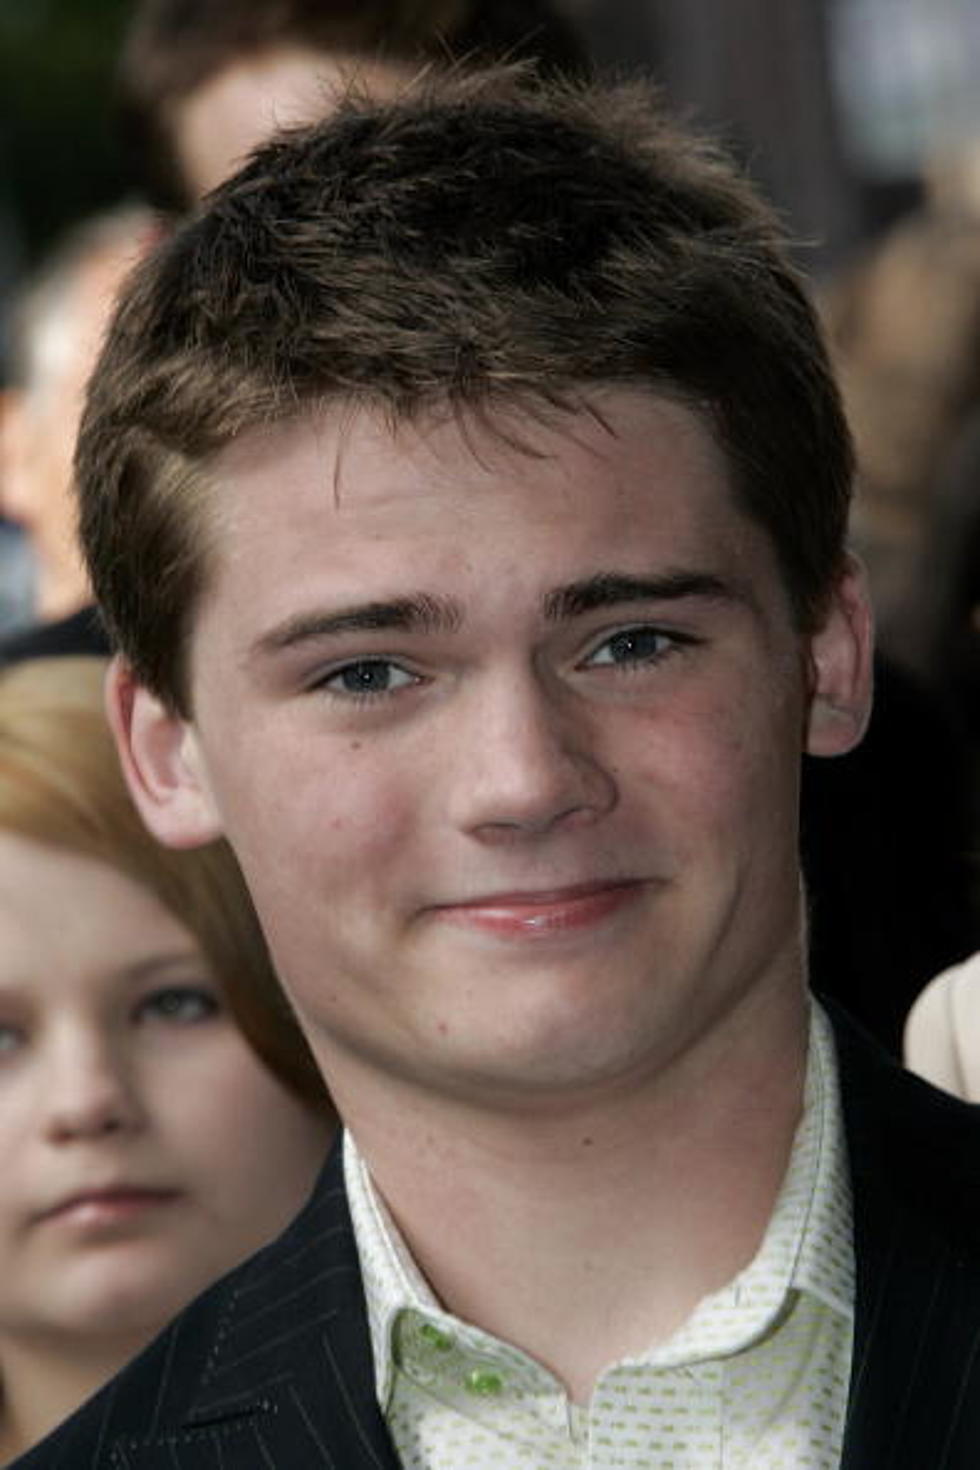 The Child Actor Who Played Young Anakin Skywalker Turns 26 [VIDEOS]